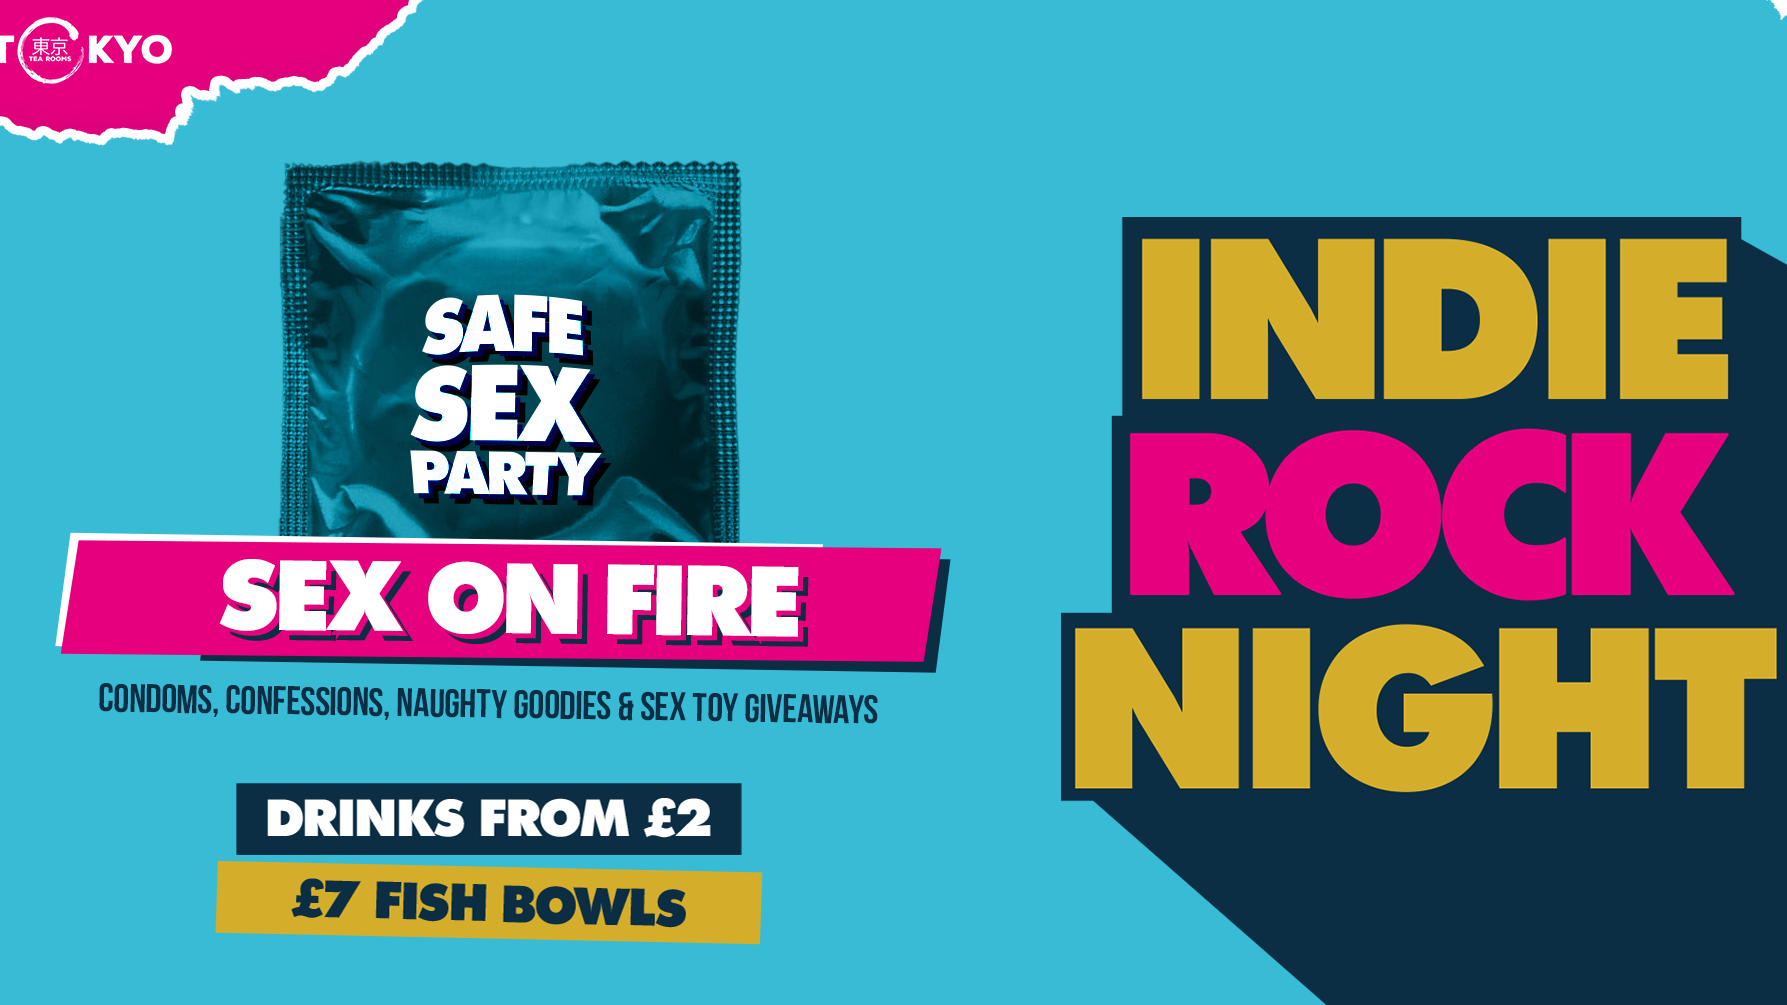 Indie Rock Night ∙ SEX ON FIRE (Safe Sex Party) *LAST 18 ONLINE TICKETS*